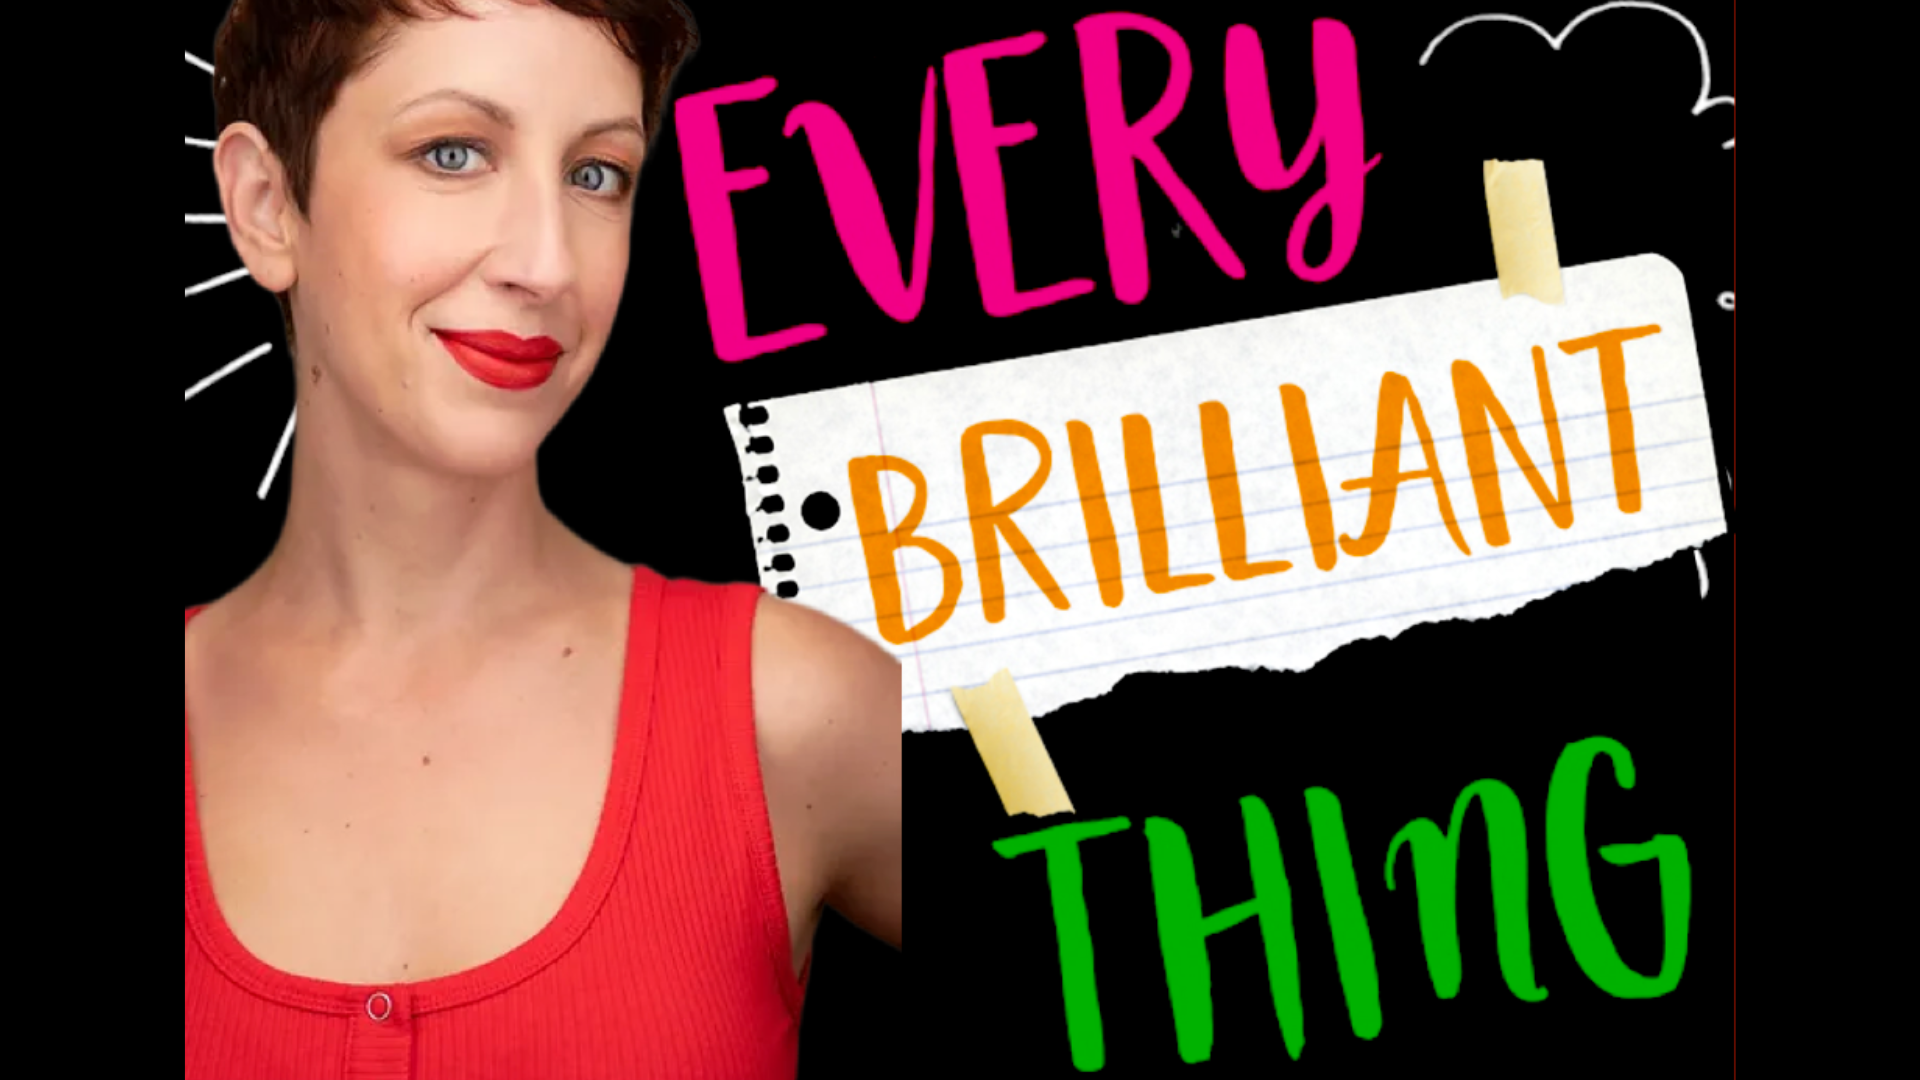 Every Brilliant Thing one-woman show